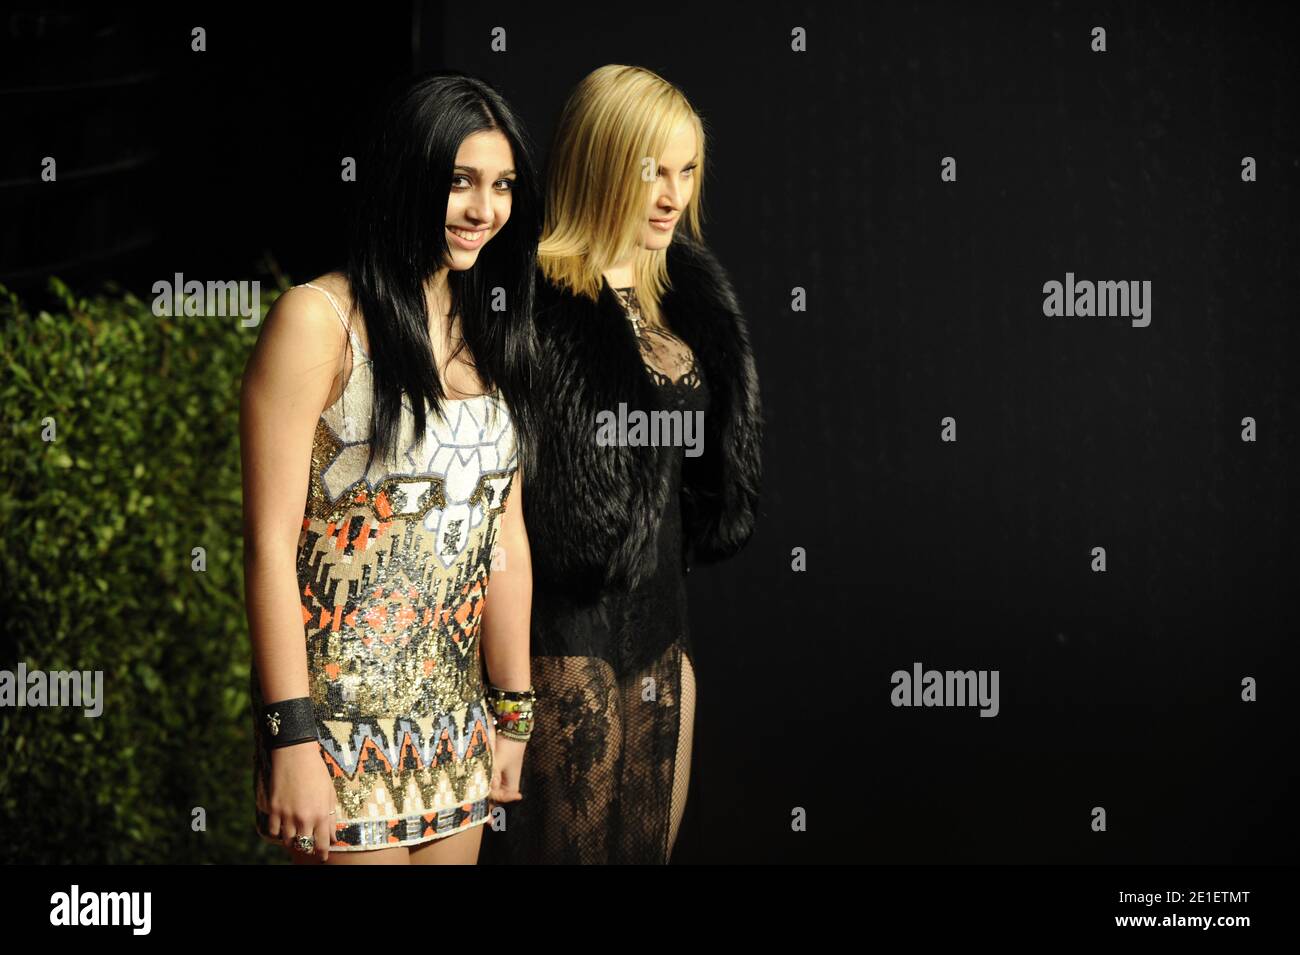 Madonna and Lourdes Leon arrive at the Vanity Fair Oscar party hosted by Graydon Carter held at Sunset Tower in West Hollywood, Los Angeles, CA, USA on February 27, 2011. Photo by Mehdi Taamallah/ABACAPRESS.COM Stock Photo